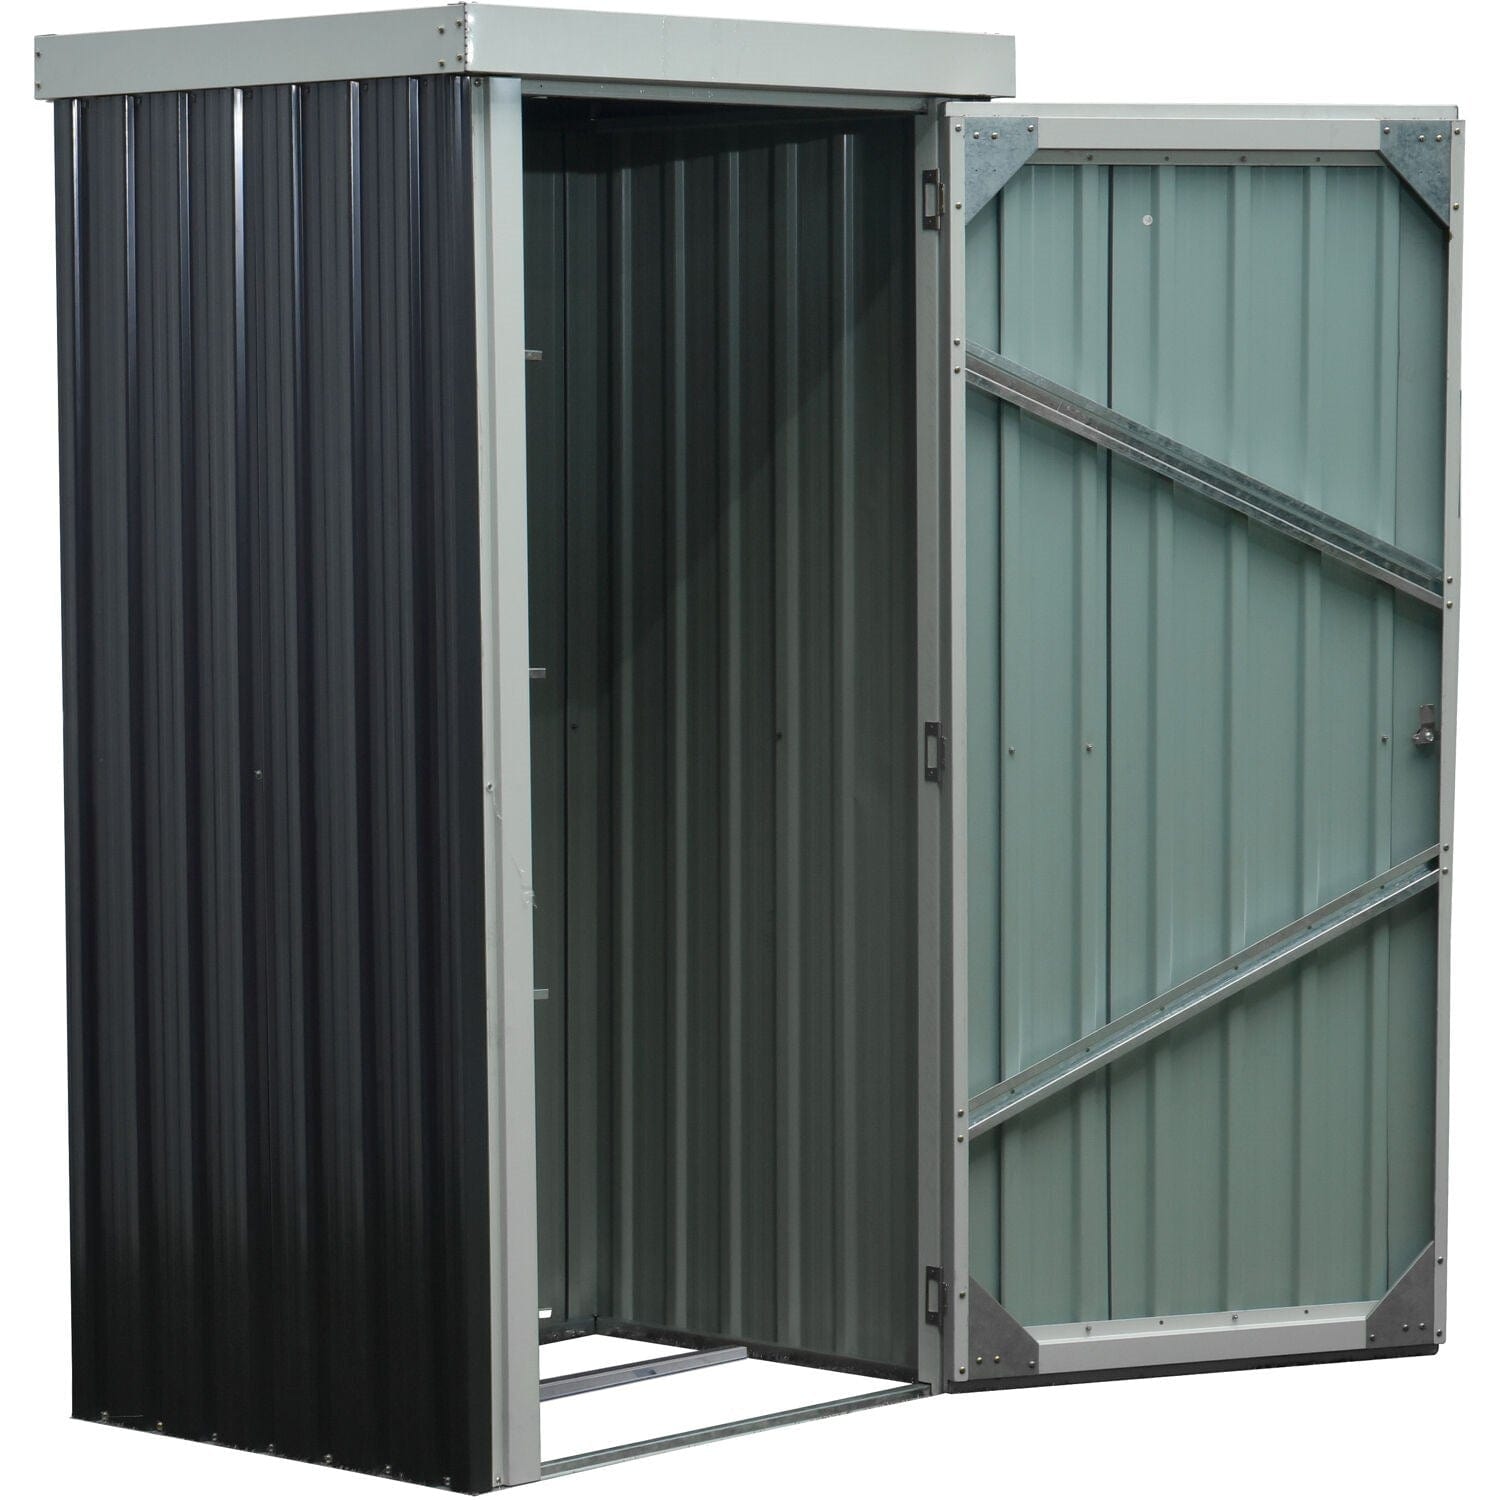 Hanover Hanover 3-Ft. x 3-Ft. x 6-Ft. Galvanized Steel Patio Storage Shed with Twist Lock and 2 Tool Hooks, Dark Gray/White